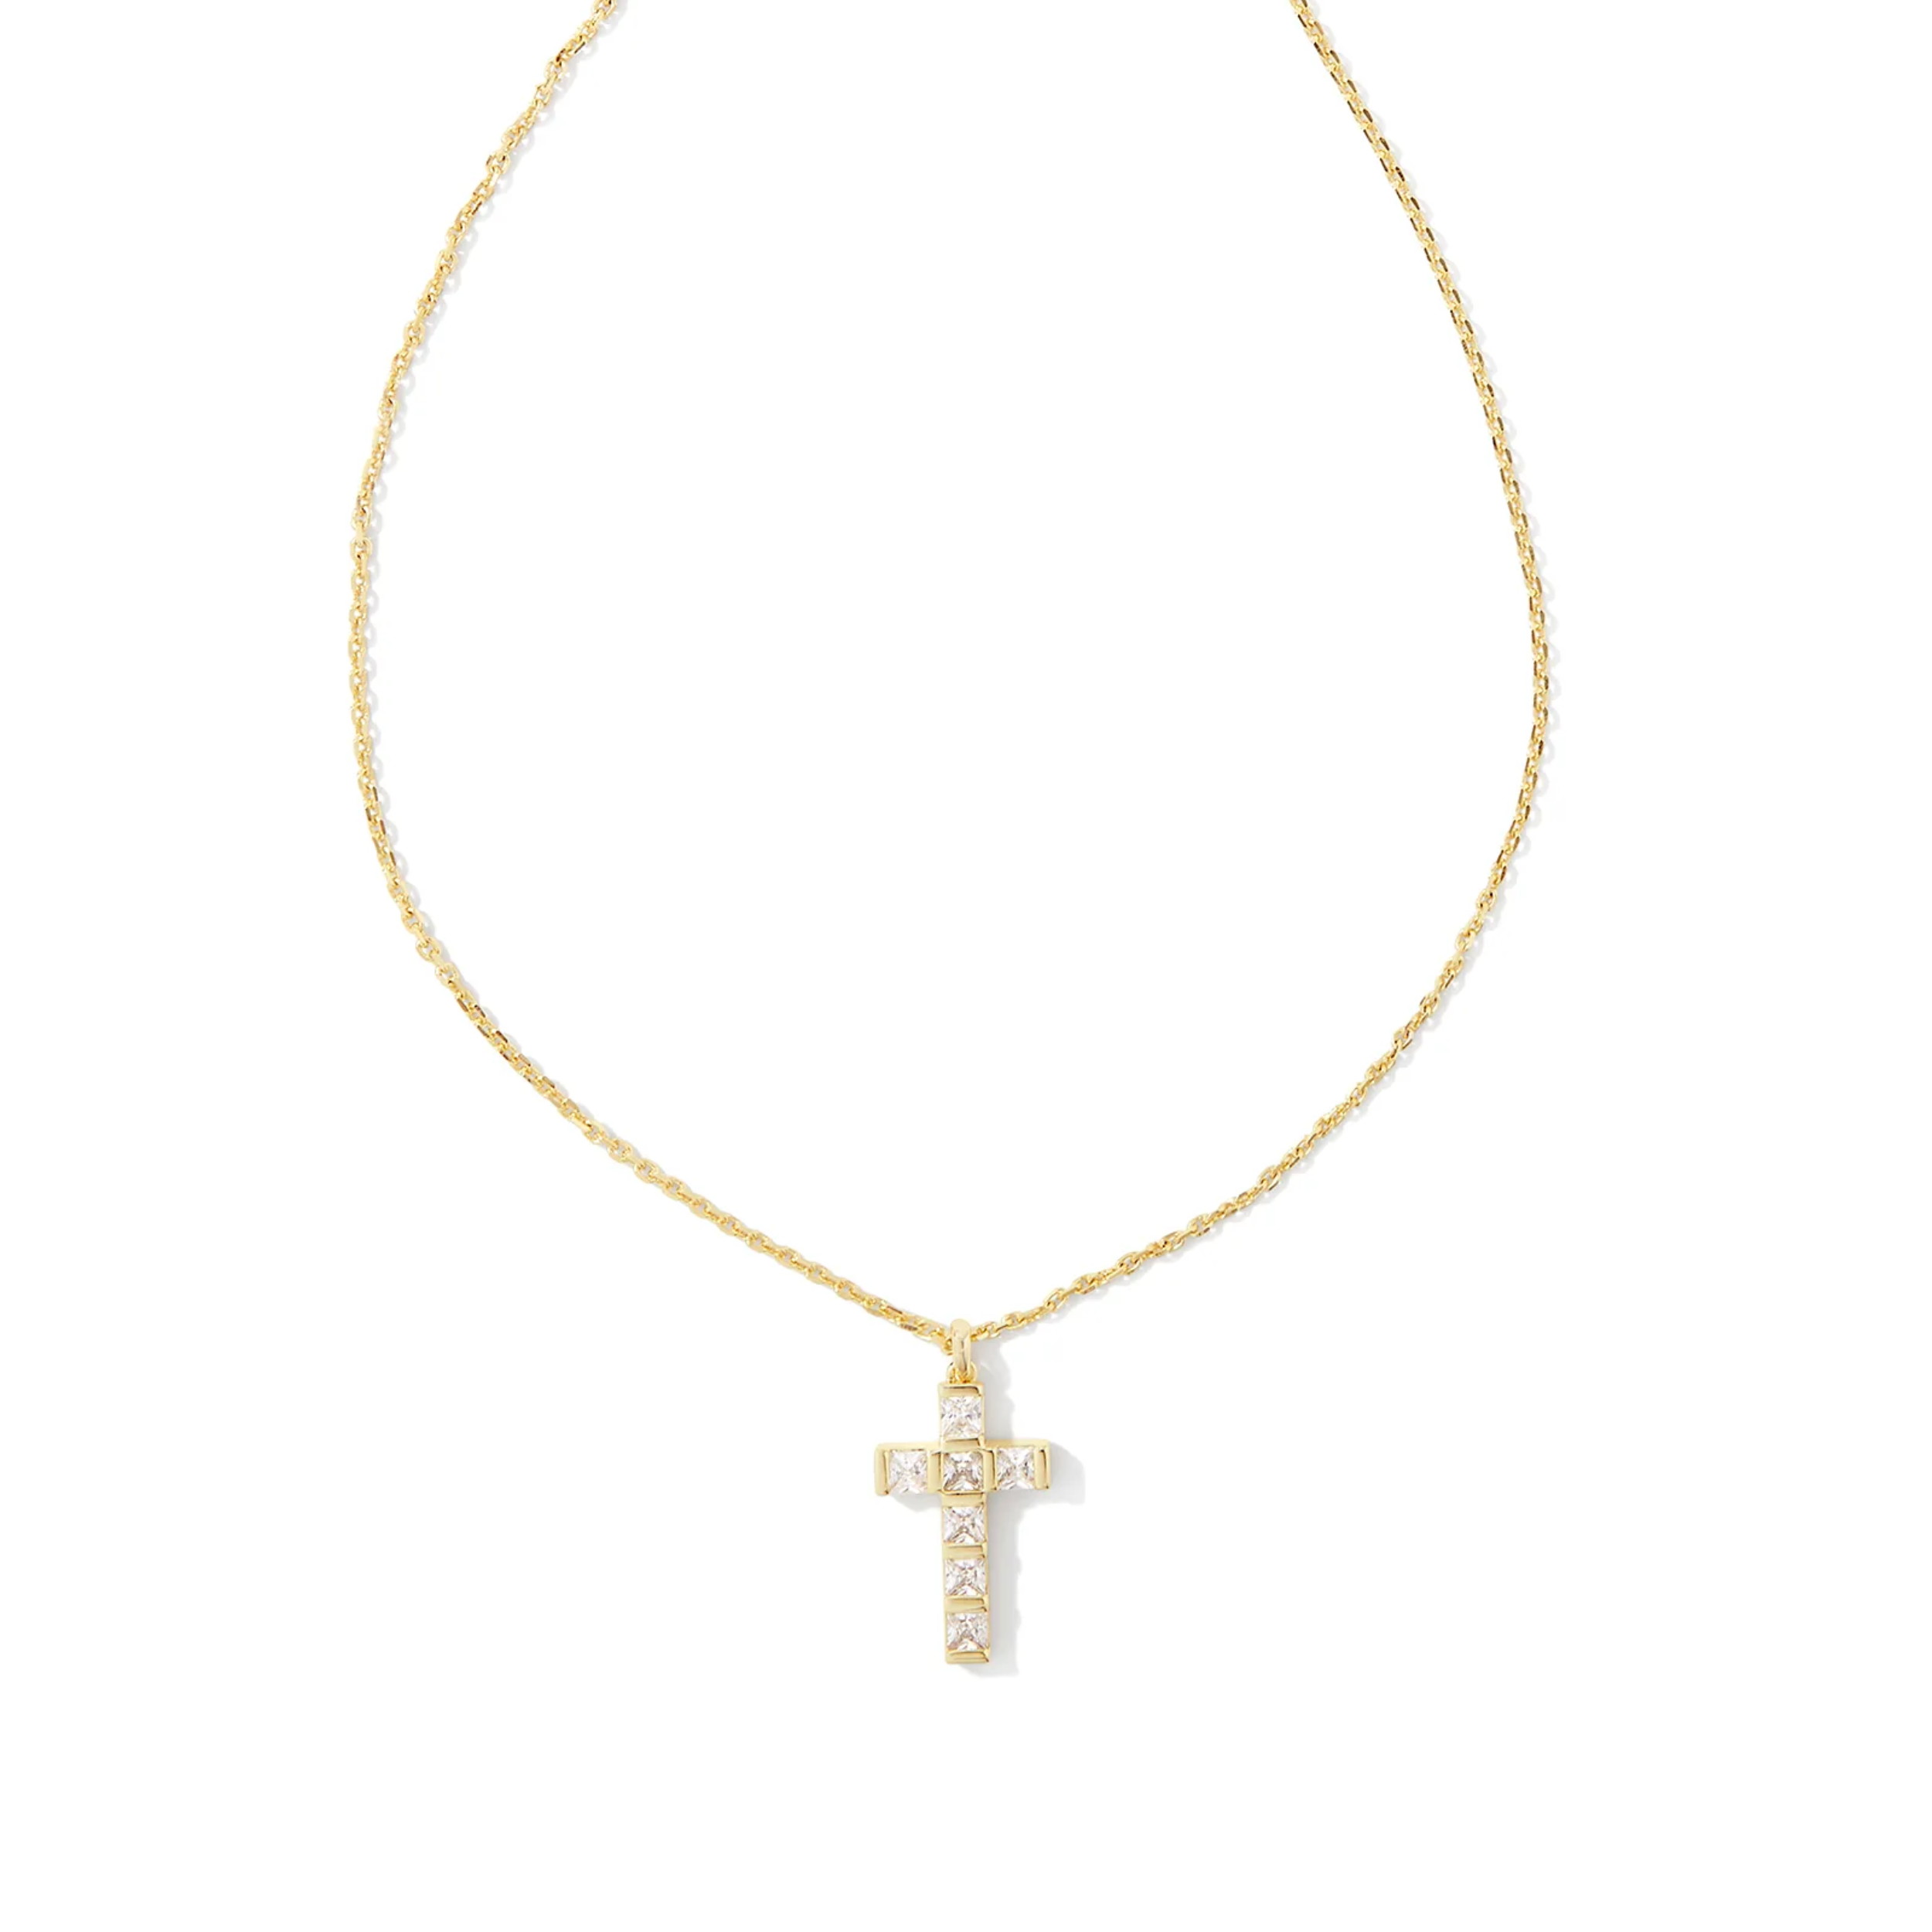 Kendra Scott | Gracie Gold Cross Pendant Necklace in White Crystal - Giddy Up Glamour Boutique